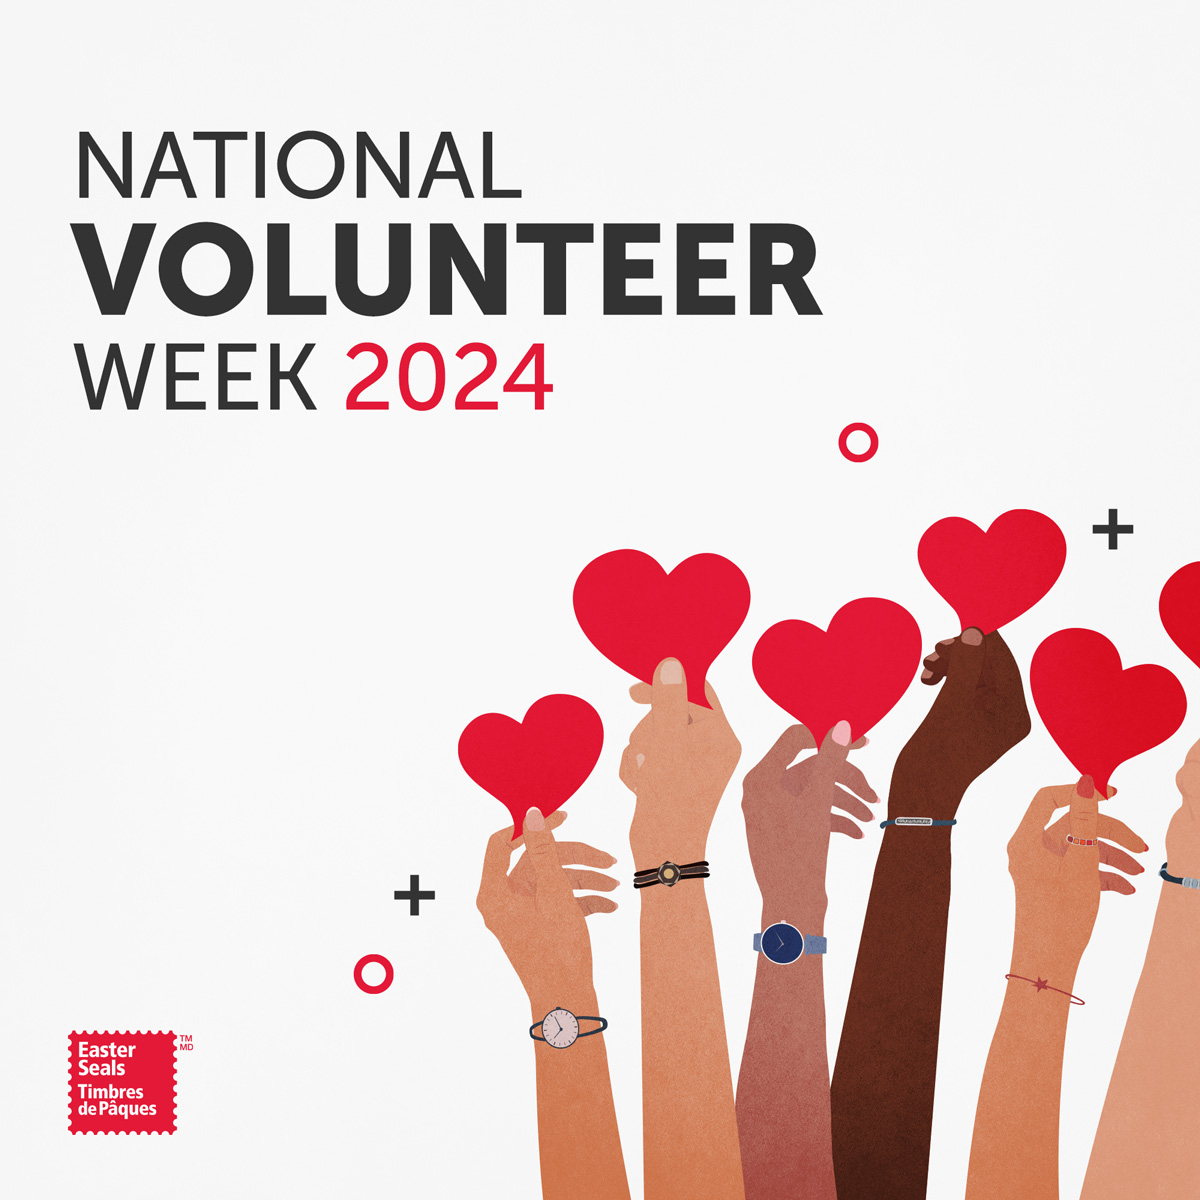 It’s #NationalVolunteerWeek! Every year at this time, we celebrate the contributions of Canadians from coast to coast who have demonstrated outstanding commitment to Easter Seals’ mission and vision through their volunteerism, passion and dedication to Easter Seals.